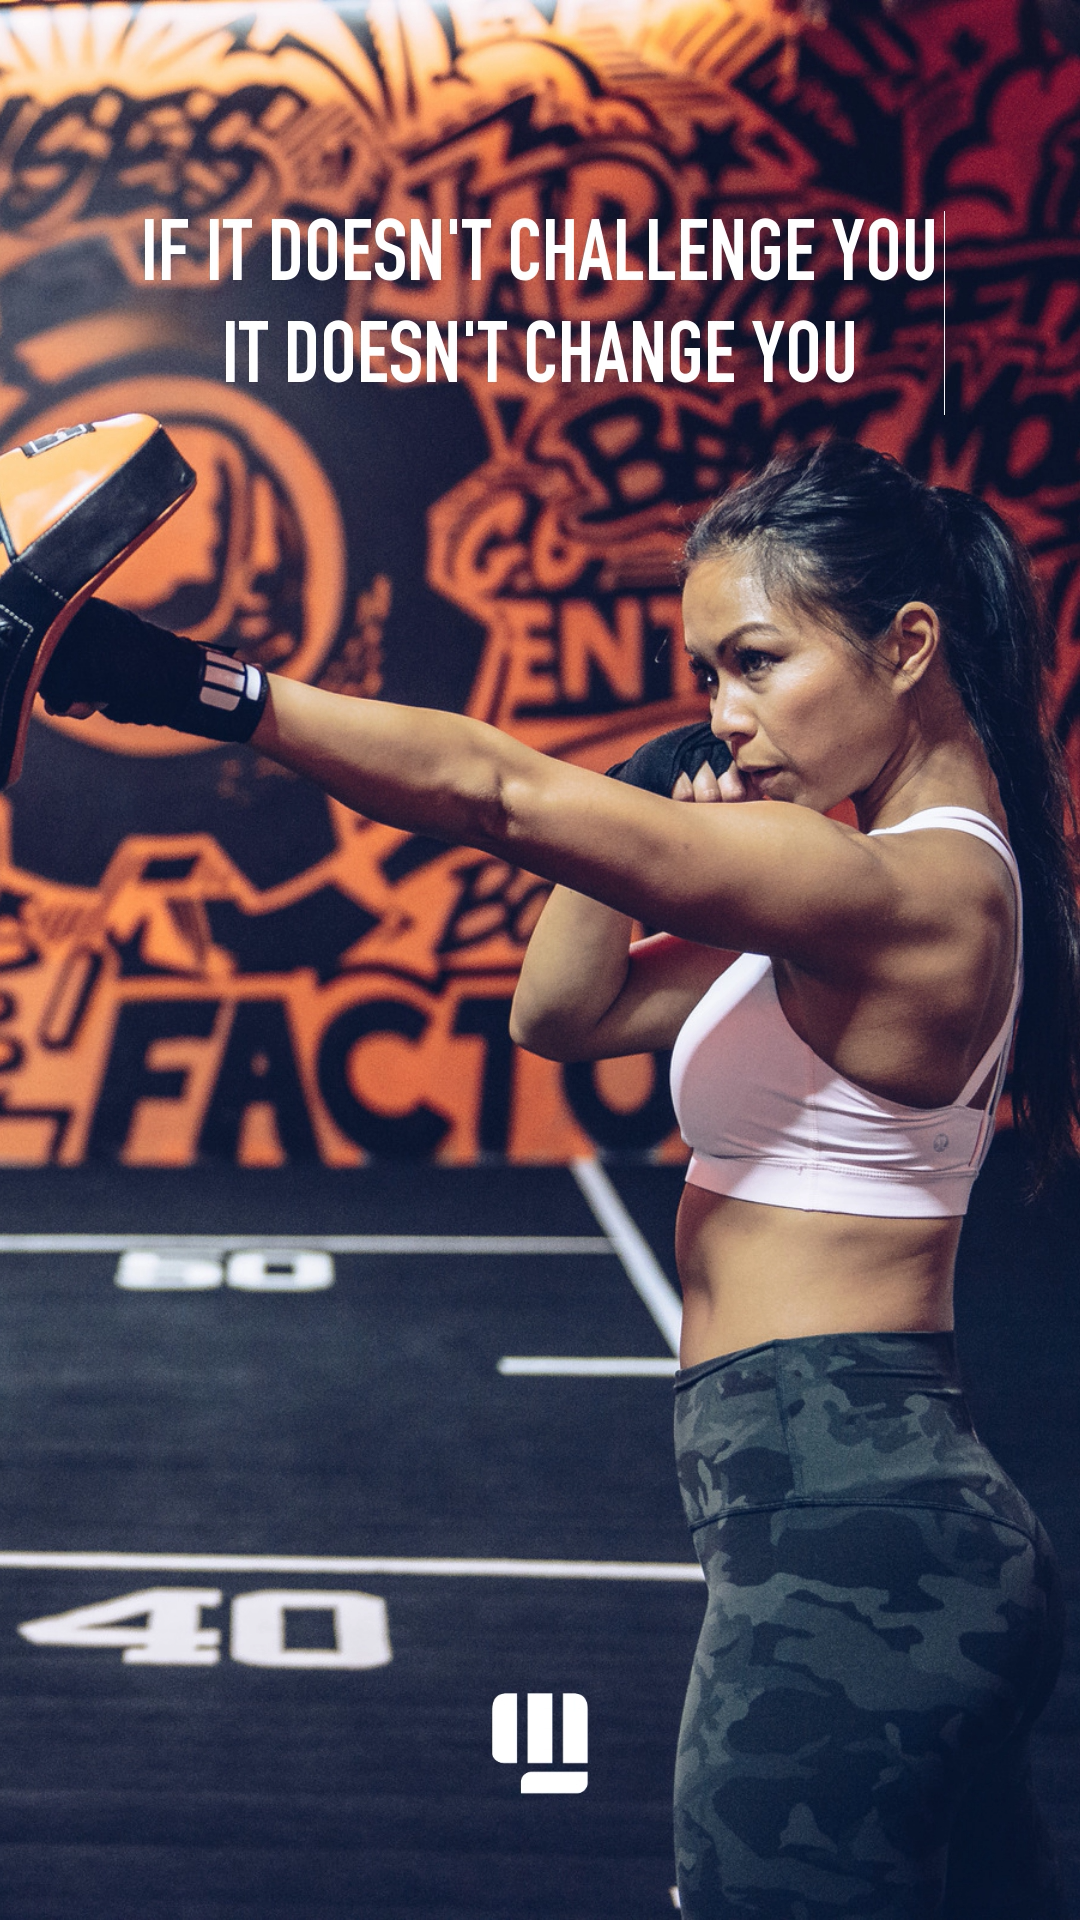 9 fitness Quotes gymshark ideas